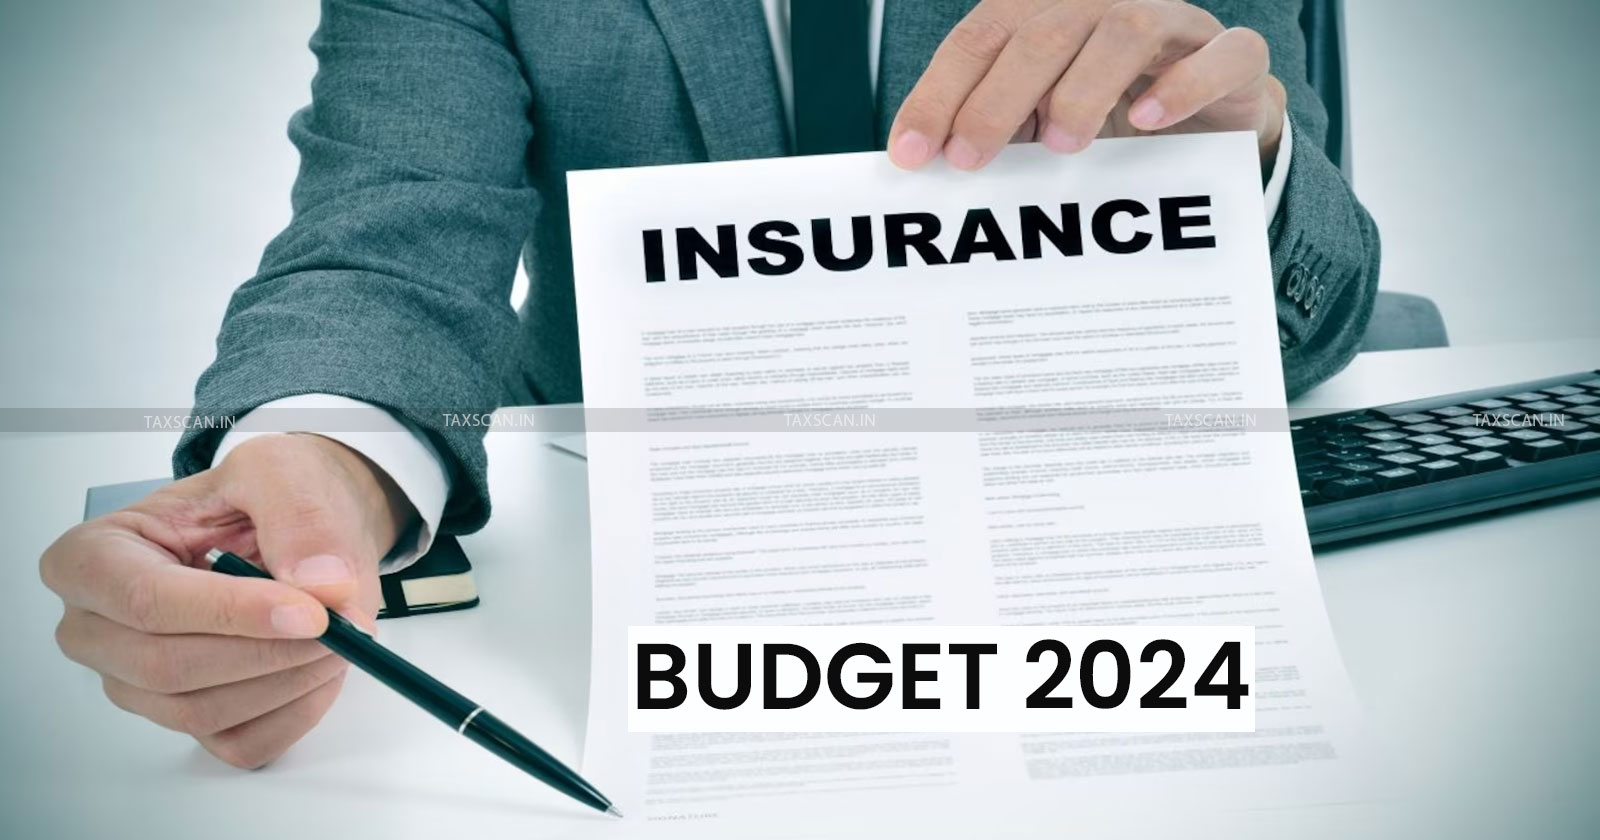 Budget 2024 - Budget updates - Budget news - Budget Impact on Insurance - Life Insurance Tax Deduction - Insurance Industry Proposals - Annuity and Pension Tax Updates - TAXSCAN